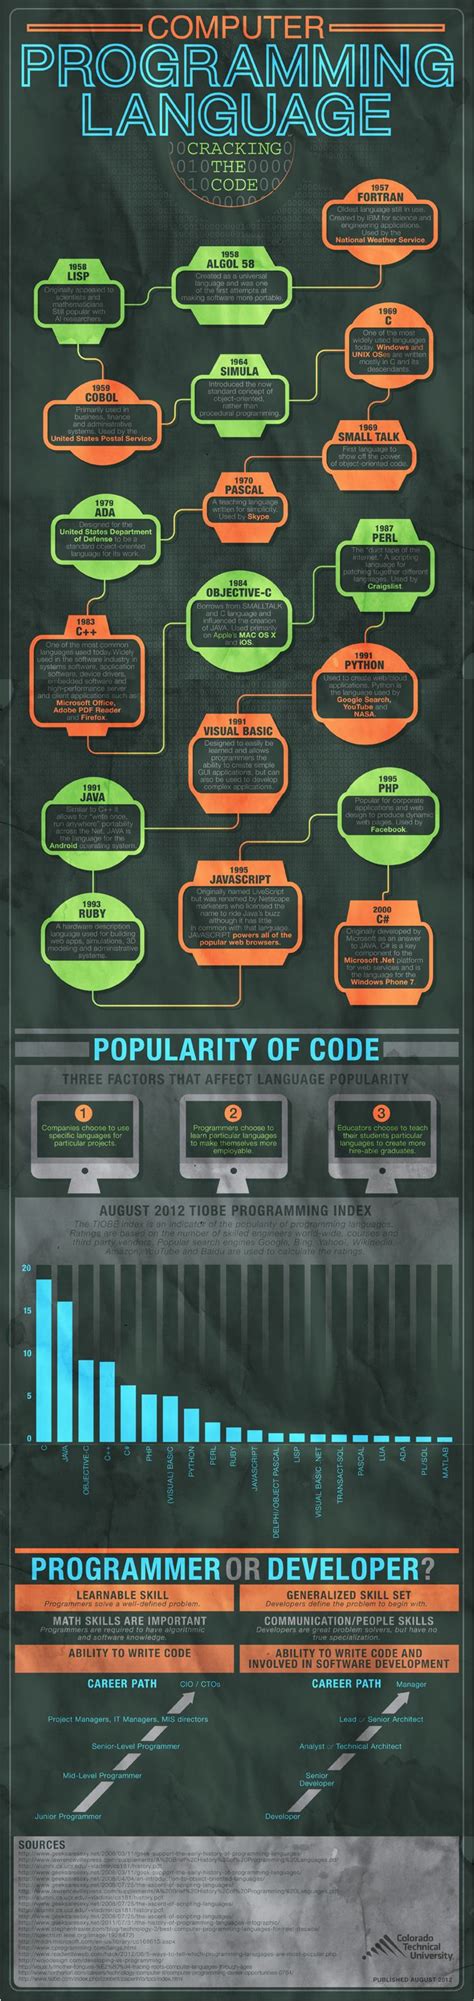 Educational Infographic If Youre Interested In An It Degree And Career Coding Can Be Pretty